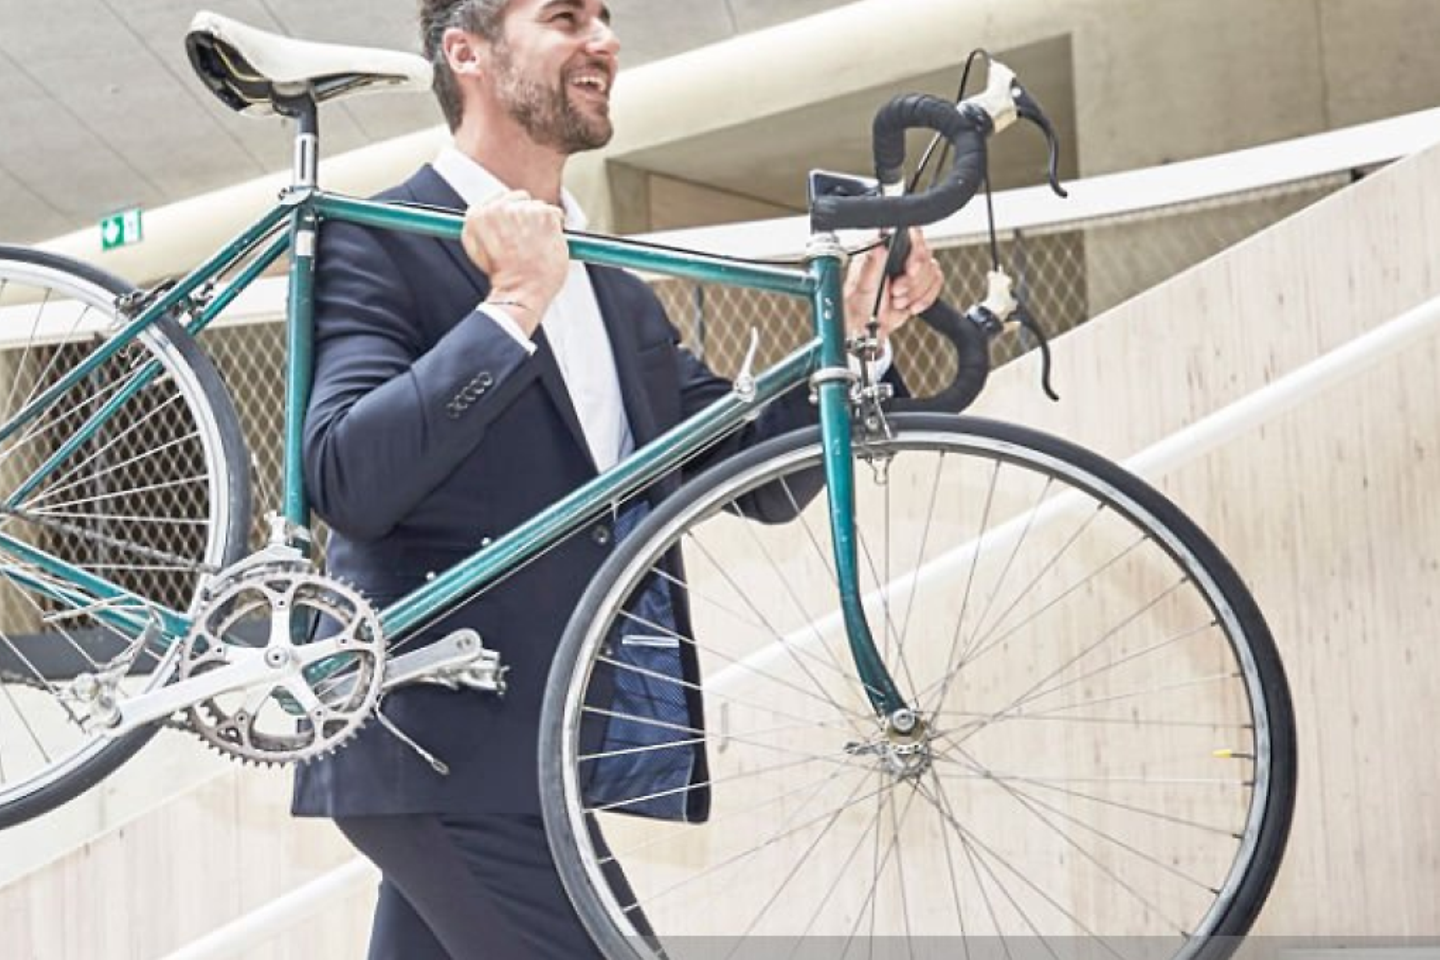 Businesssman carrying bicycle in modern office building